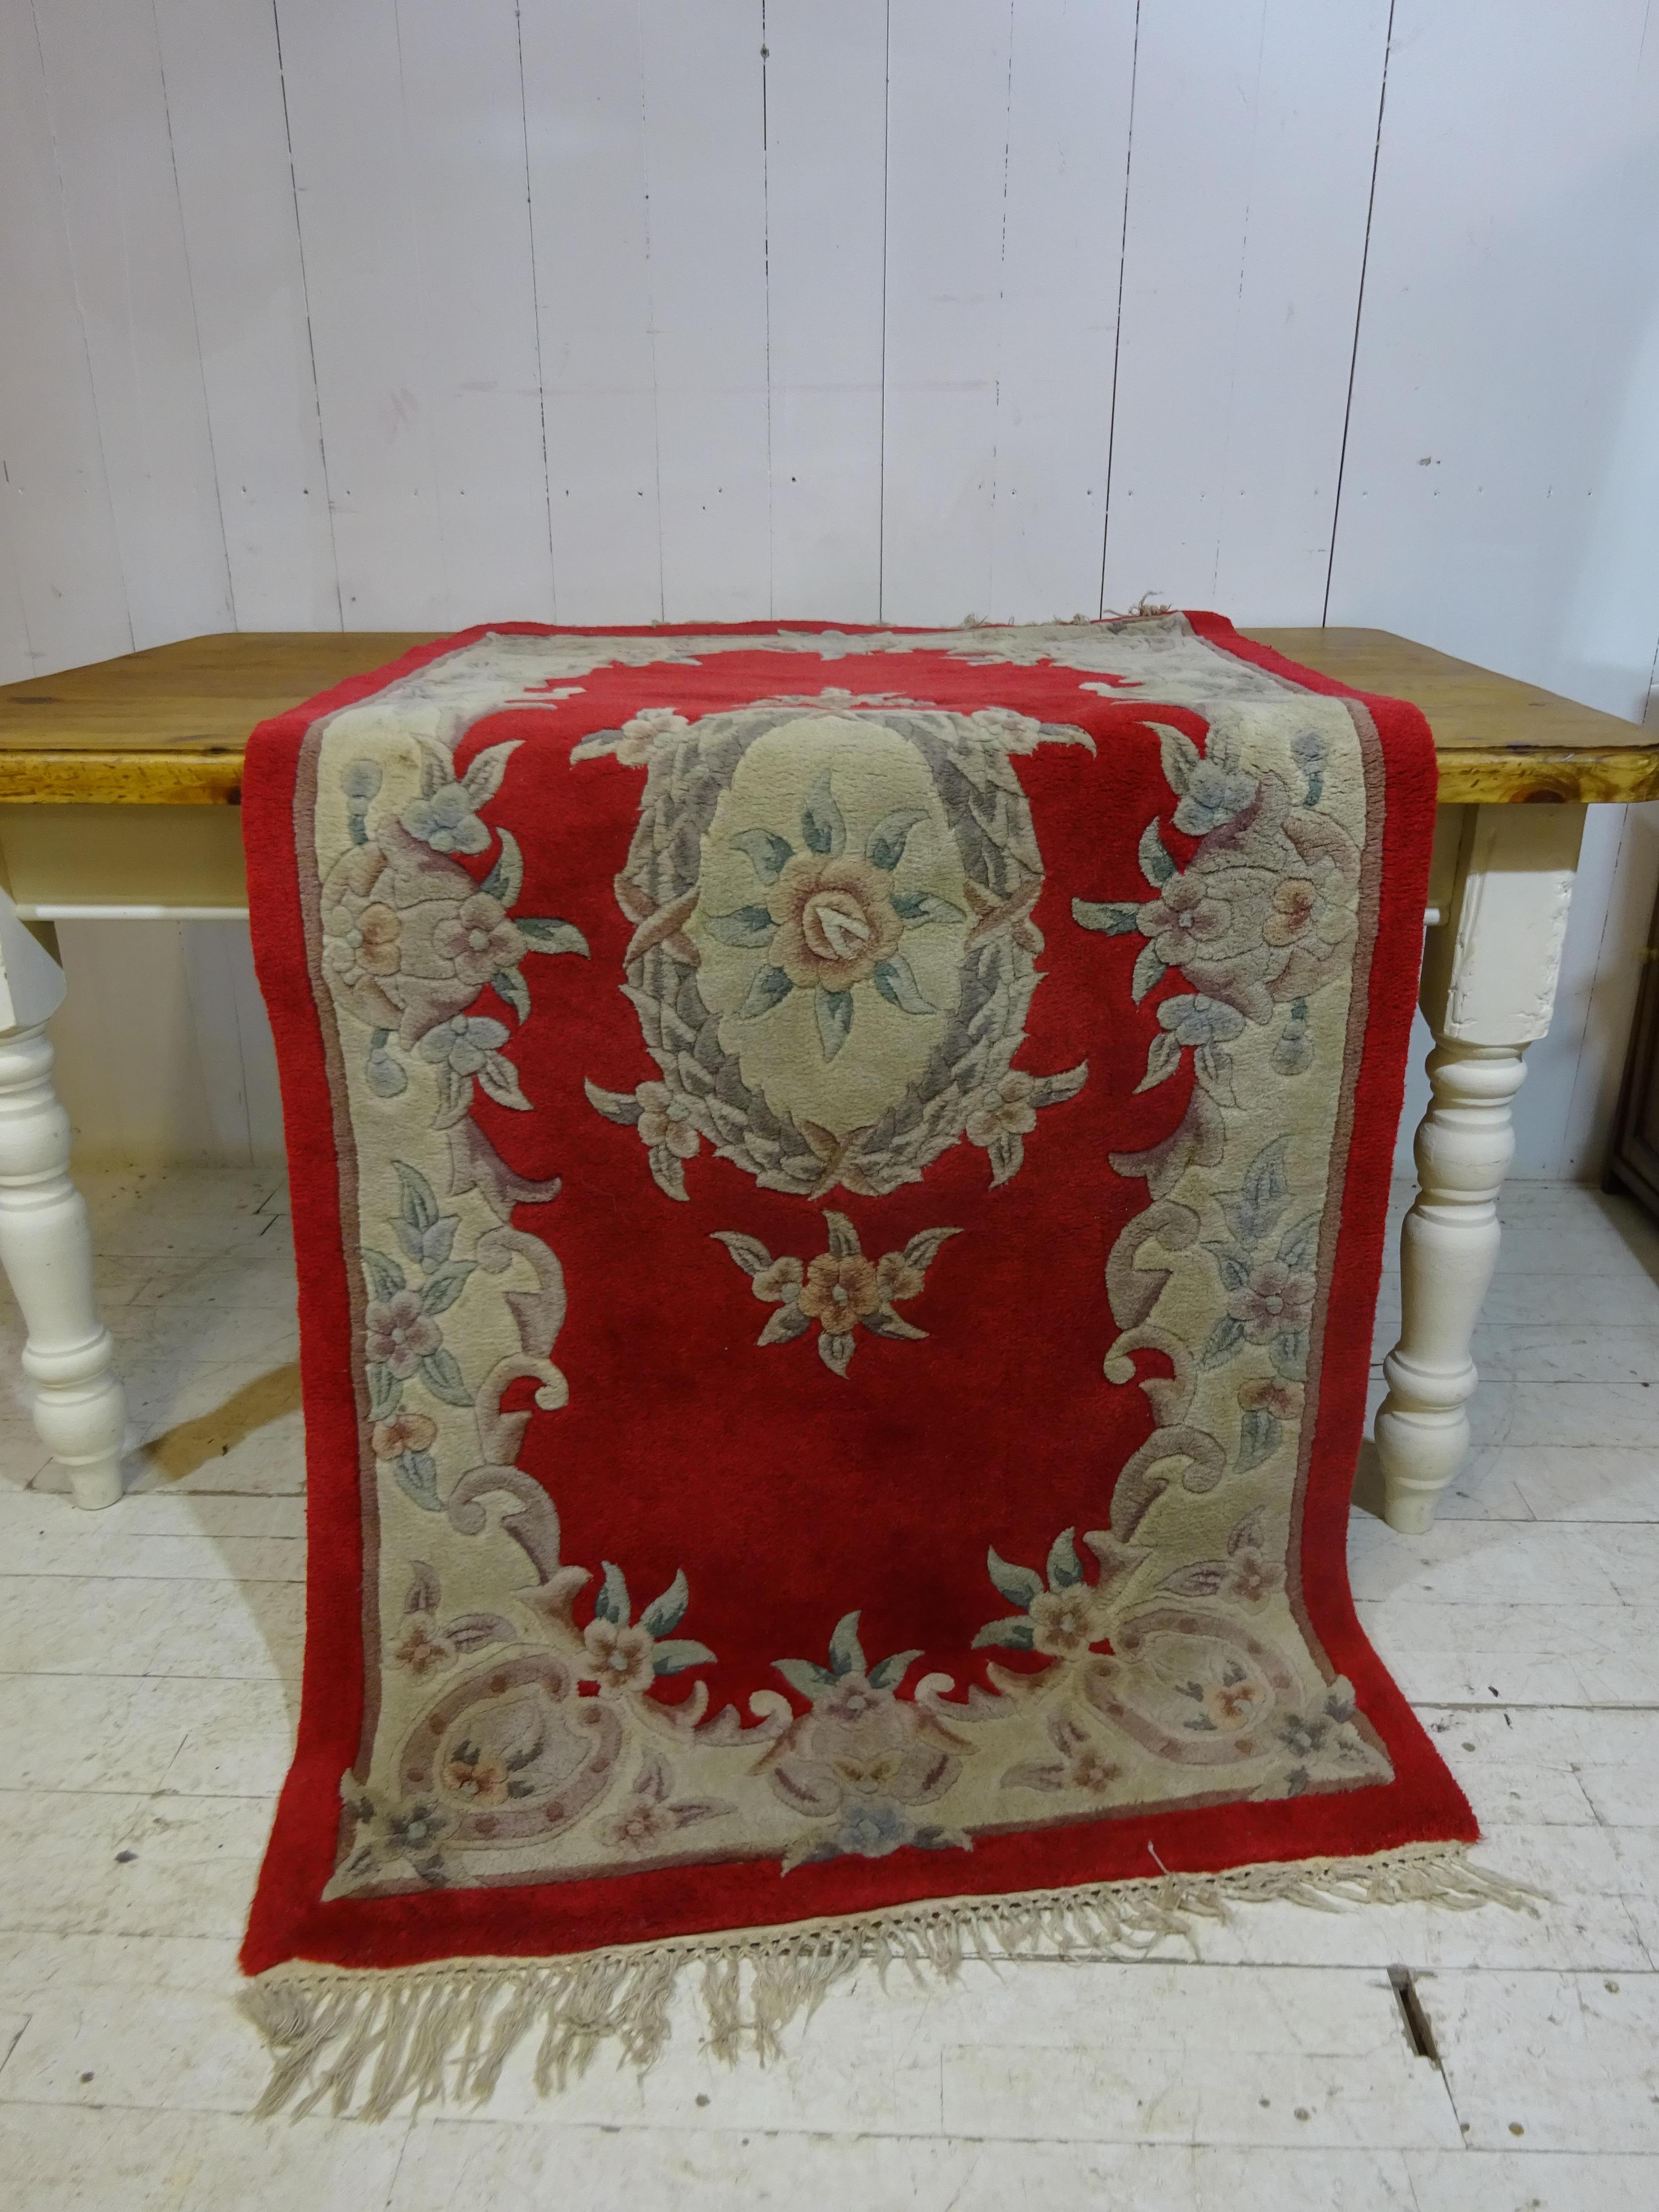 In the same family since new this rug was one of over 20 rugs imported in the mid 1920's from China. We have managed to source most these fabulous rugs which are ideal for any room.

The rug is pure wool and is carefully woven to provide a thick